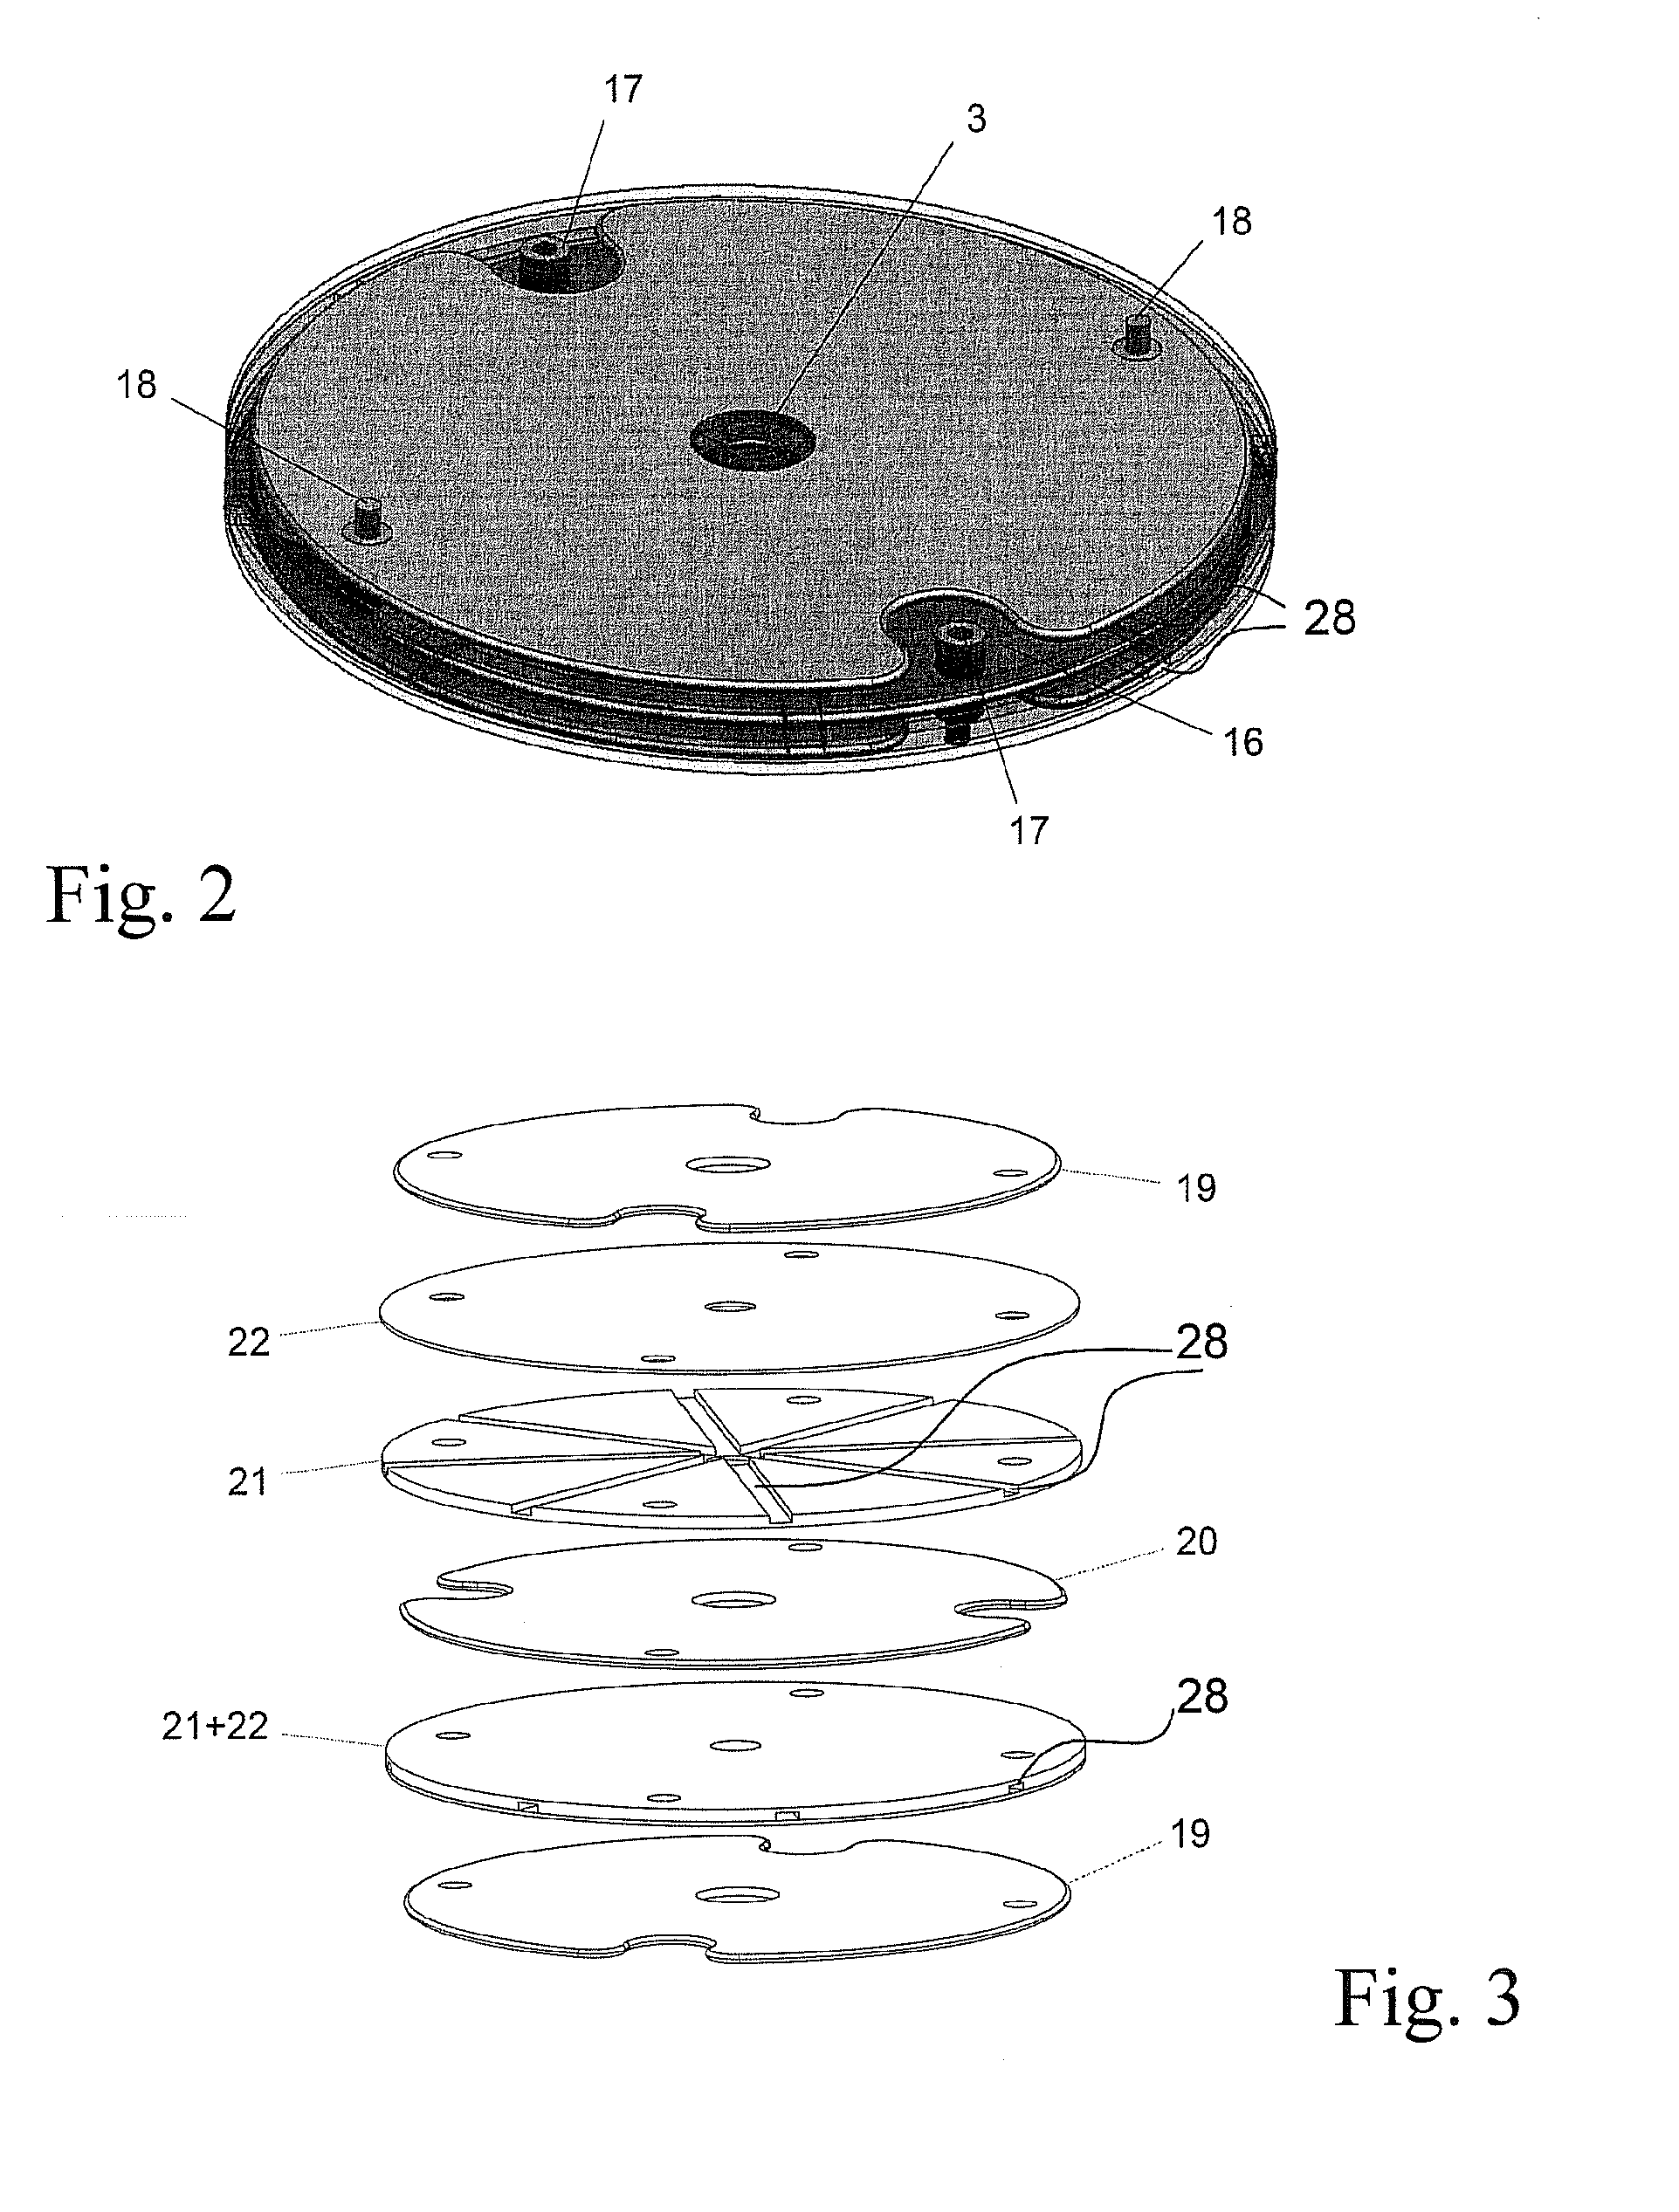 Remote non-thermal atmospheric plasma treatment of temperature sensitive particulate materials and apparatus therefore